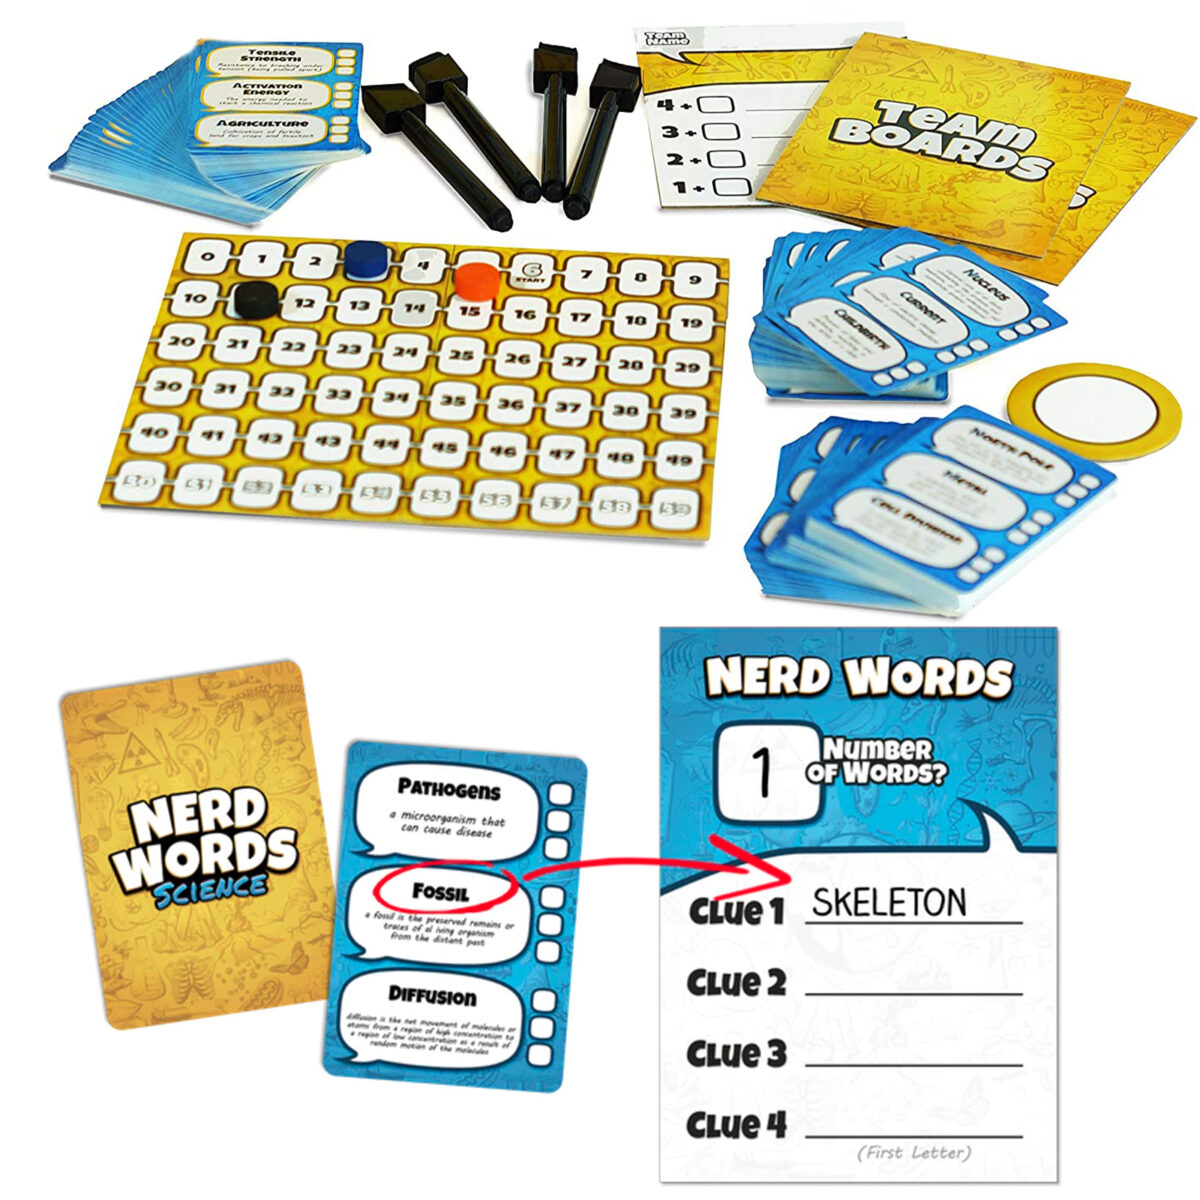 Nerd Words: Science! (Genius Games) is a card game to expand your knowledge and vocabulary of different scientific terms.